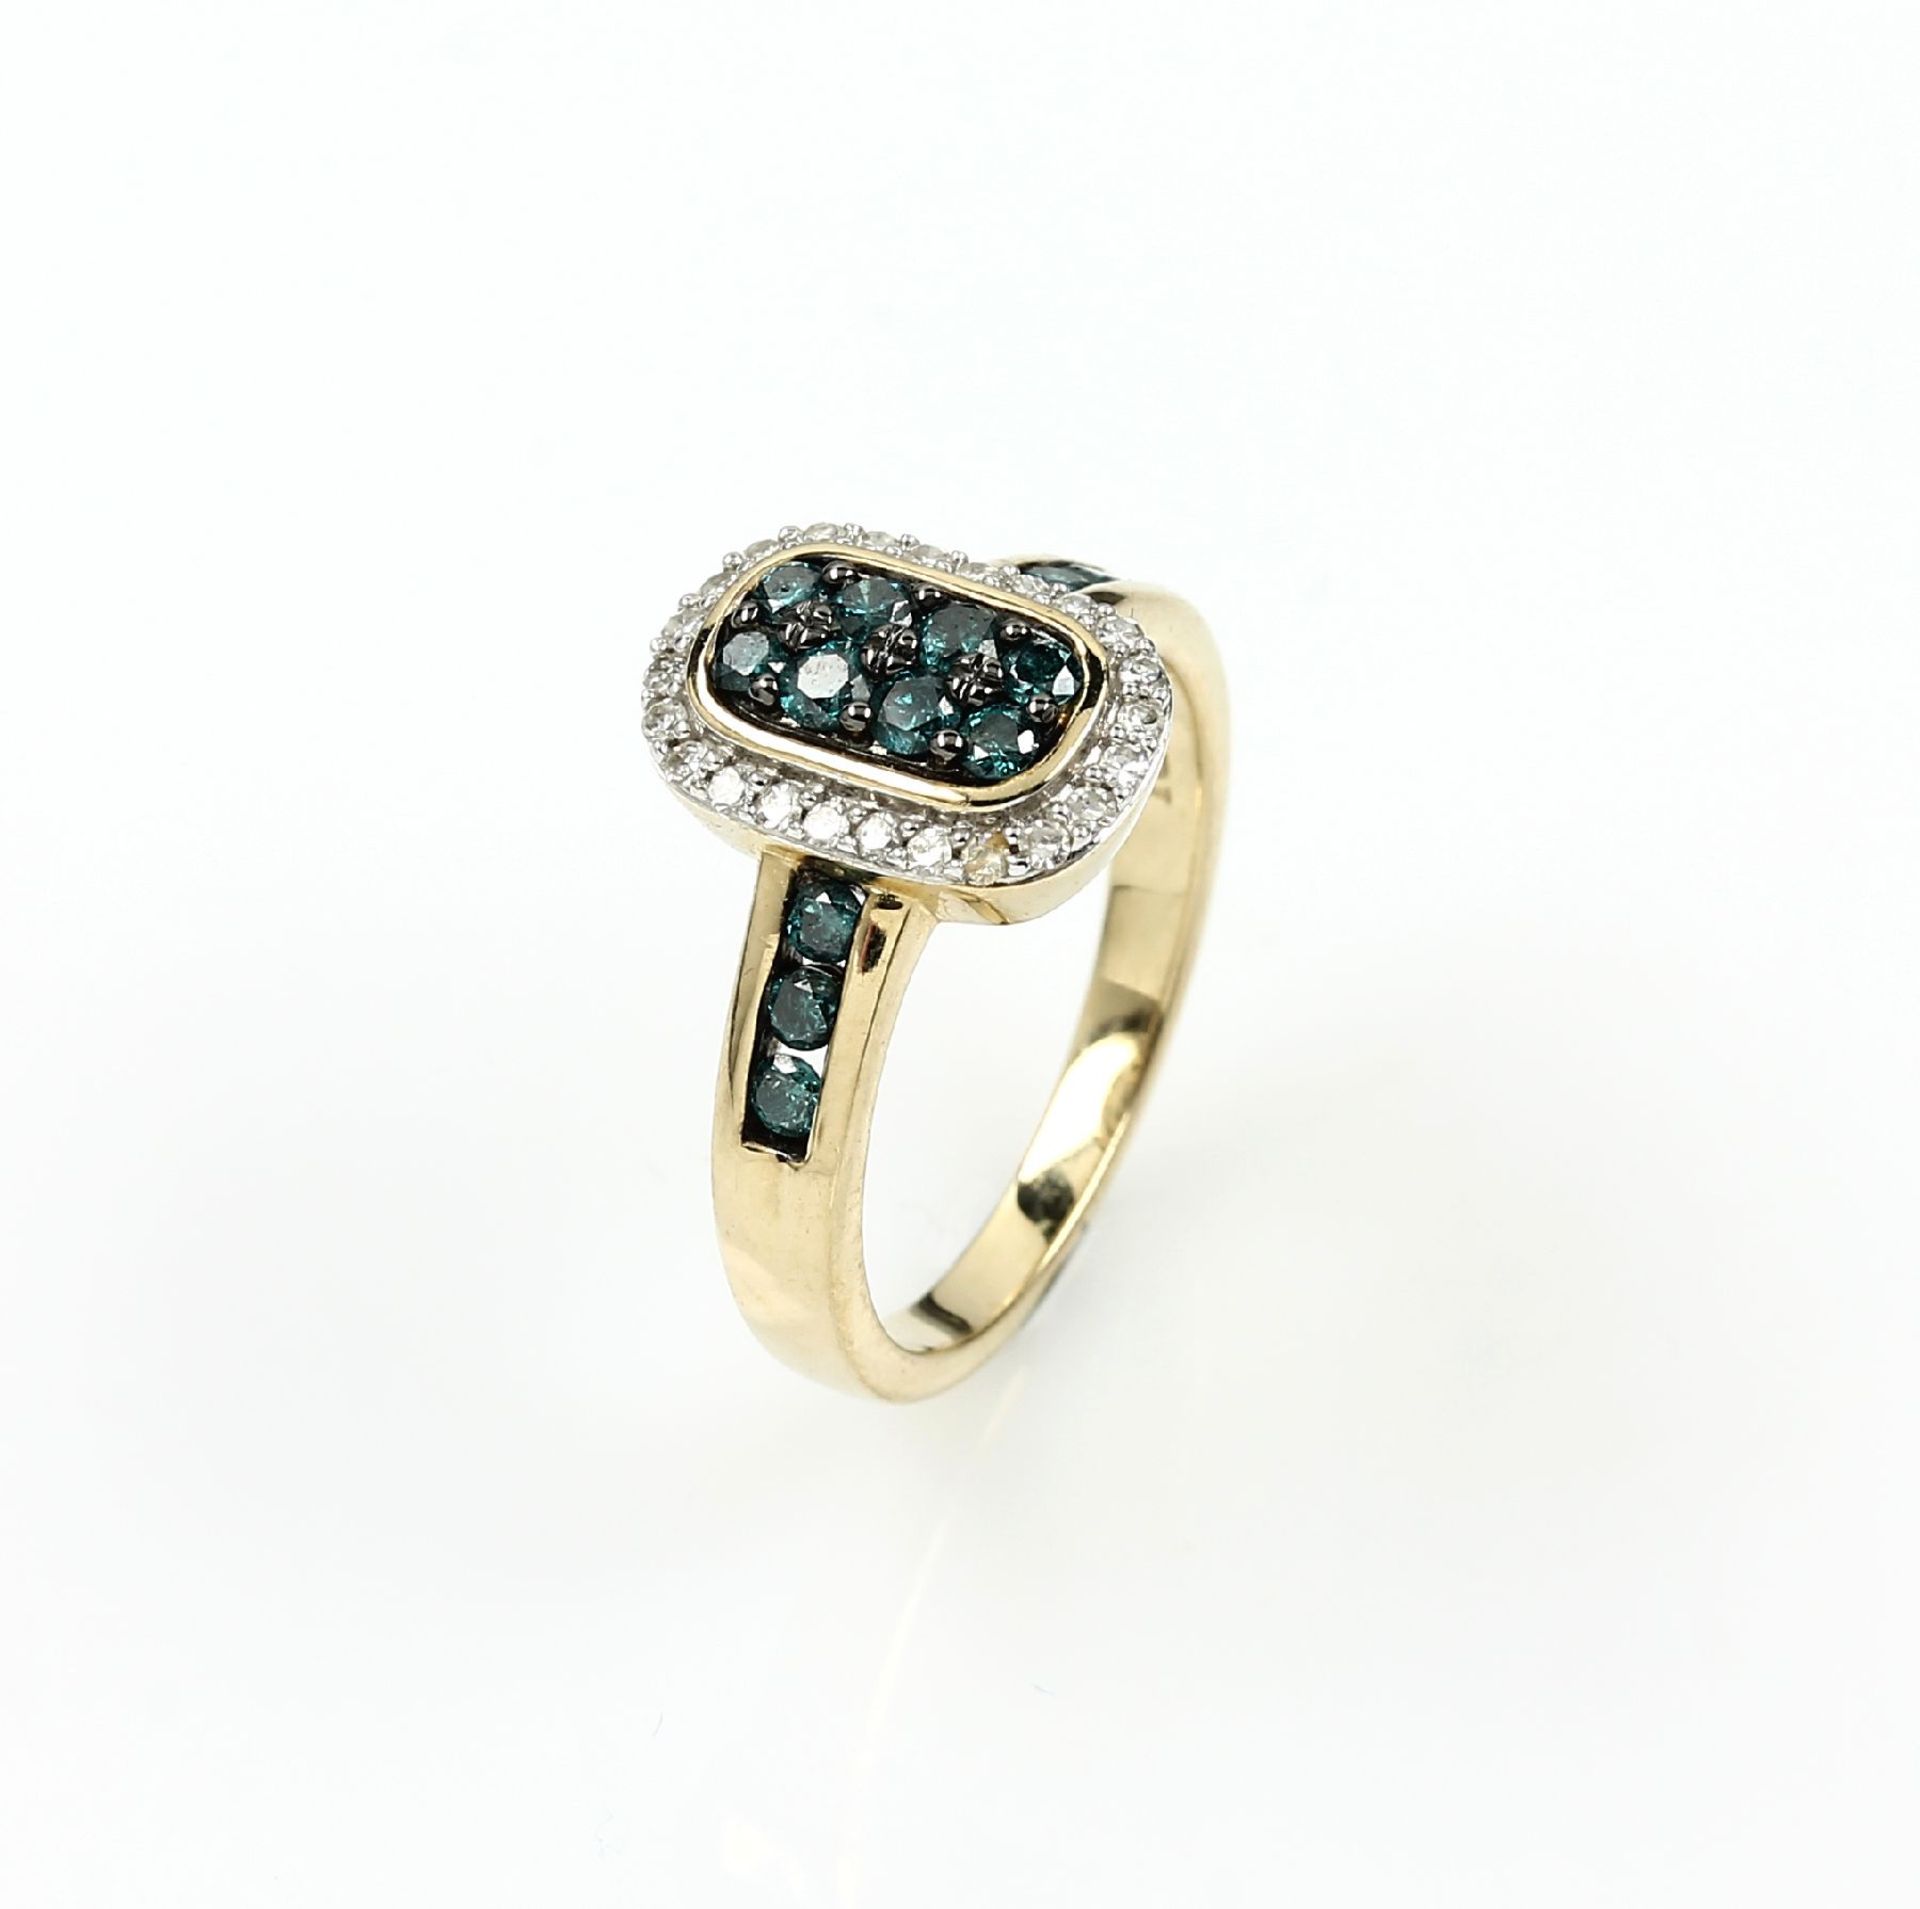 9 kt gold ring with diamonds , YG/WG 375/000, brilliants and diamonds total approx. 1.0